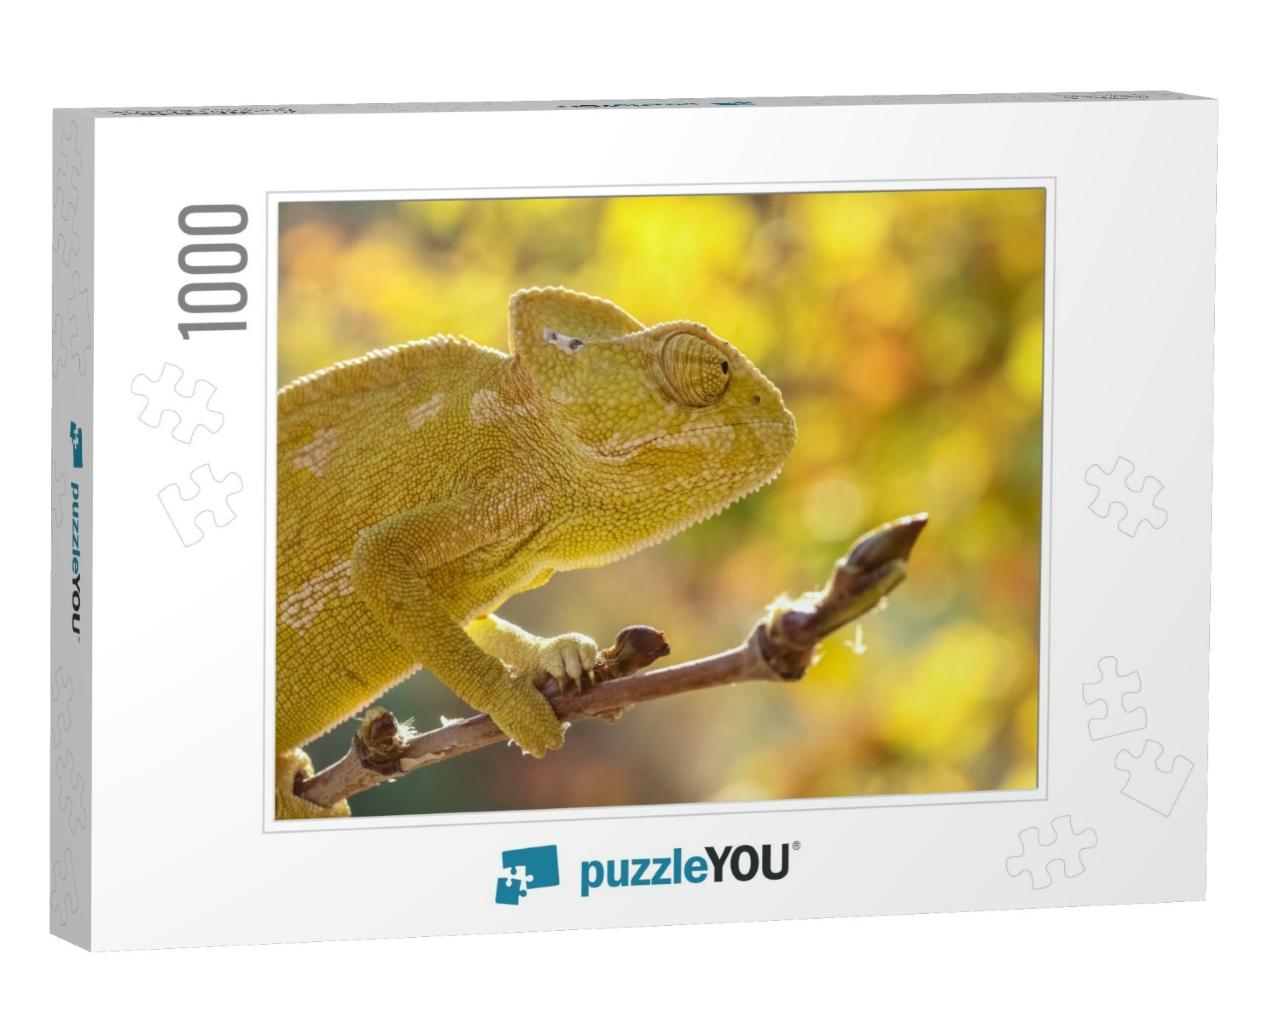 Common Chameleon Chamaeleo Chameleon in Southern Turkey... Jigsaw Puzzle with 1000 pieces